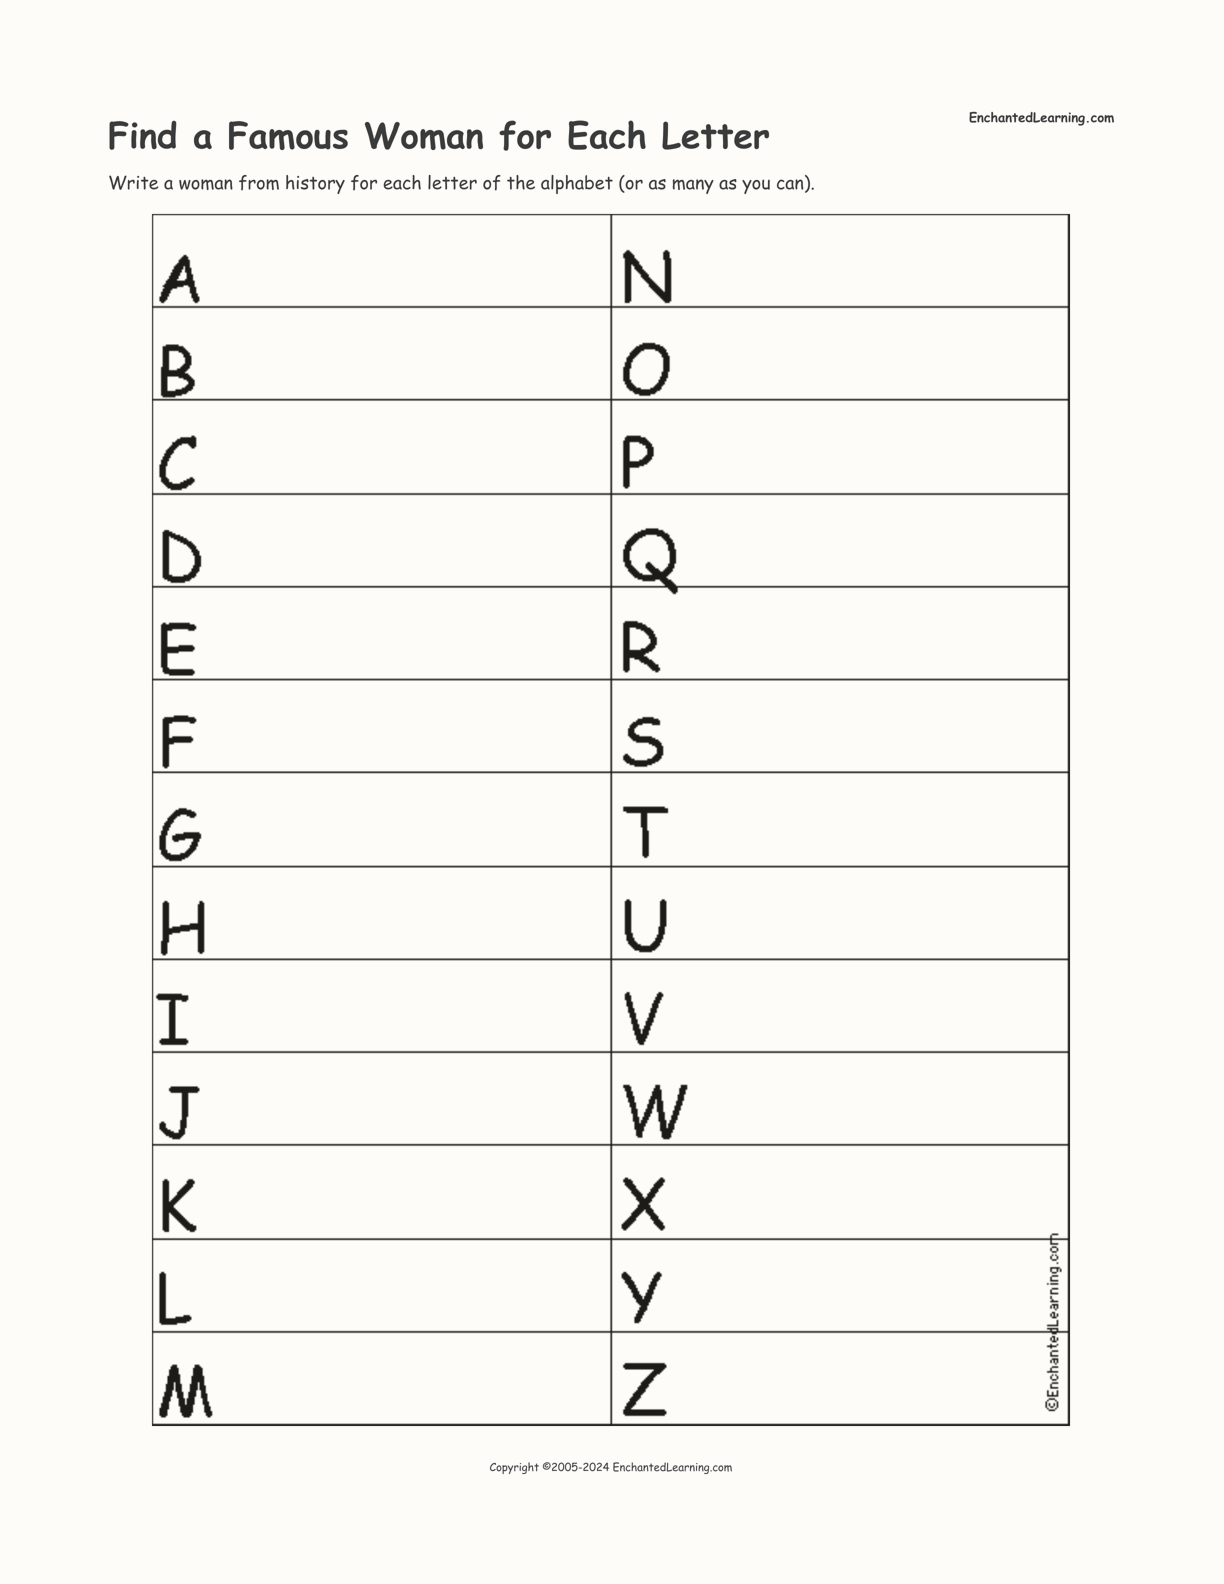 Find a Famous Woman for Each Letter interactive worksheet page 1